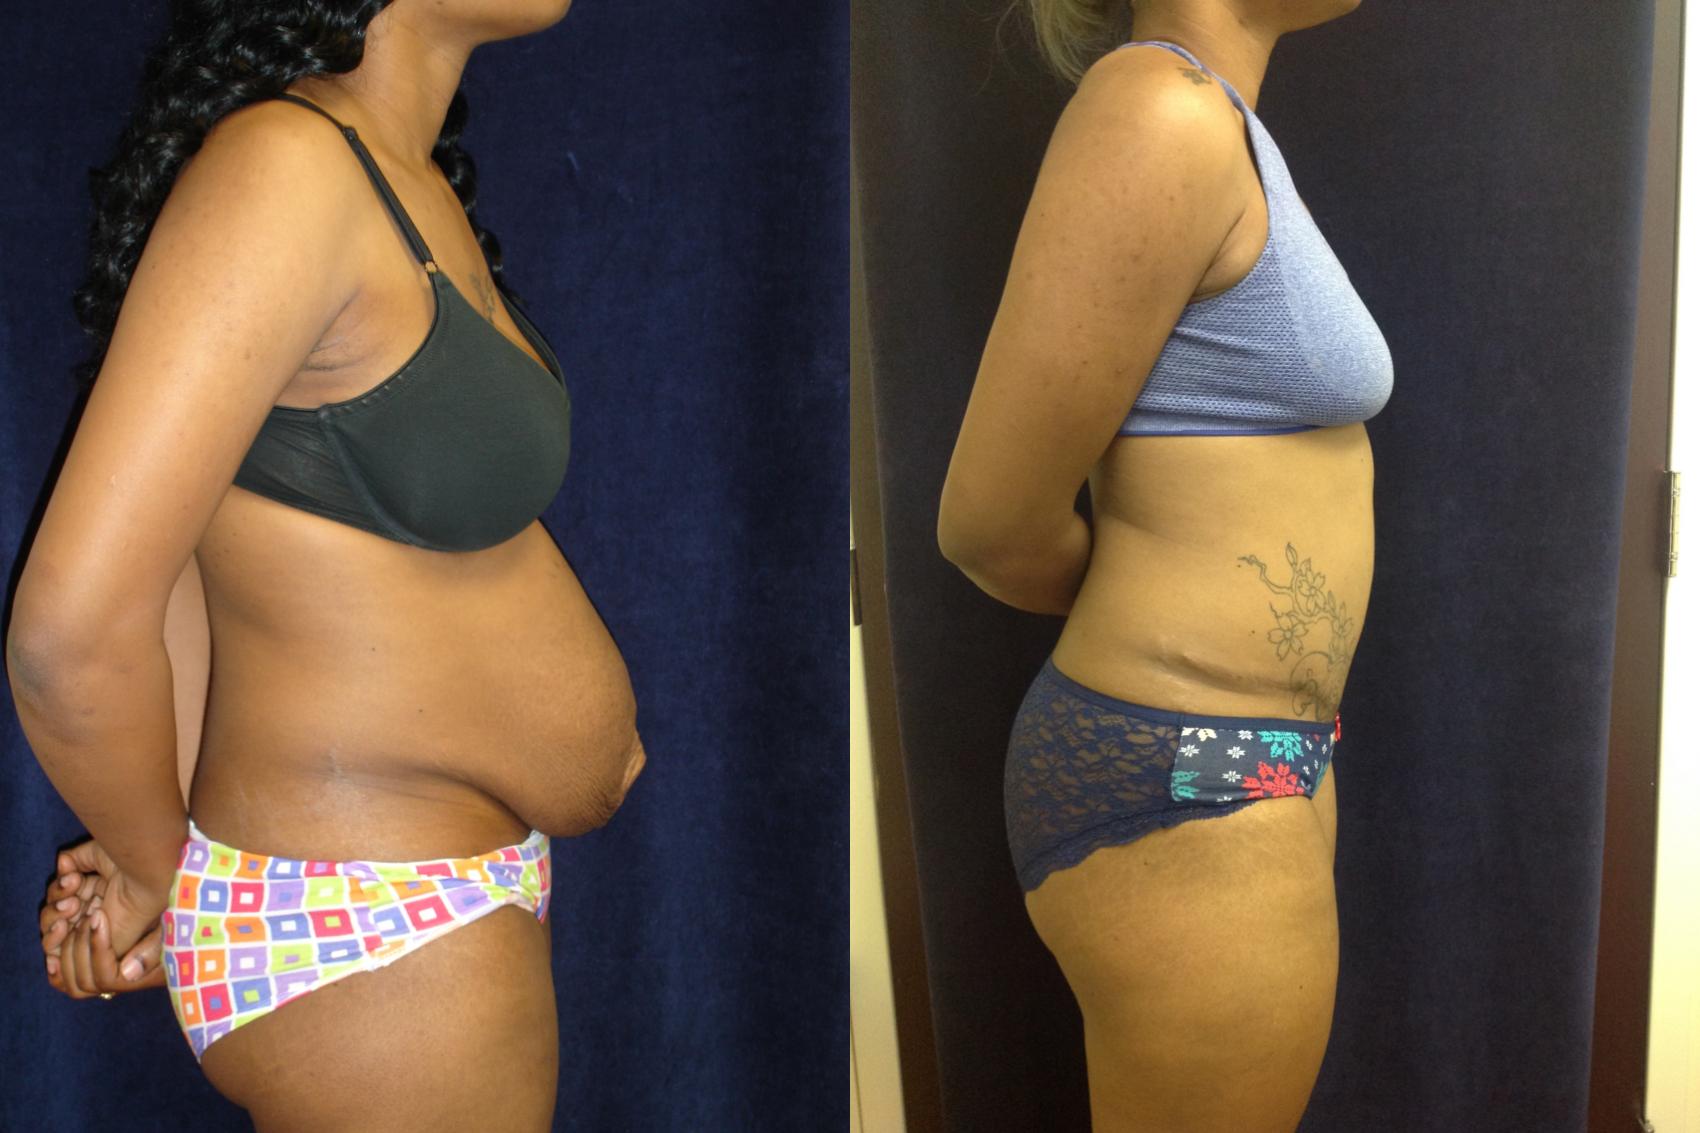 Tummy Tuck Before & After Photo | San Francisco, CA | Kaiser Permanente Cosmetic Services